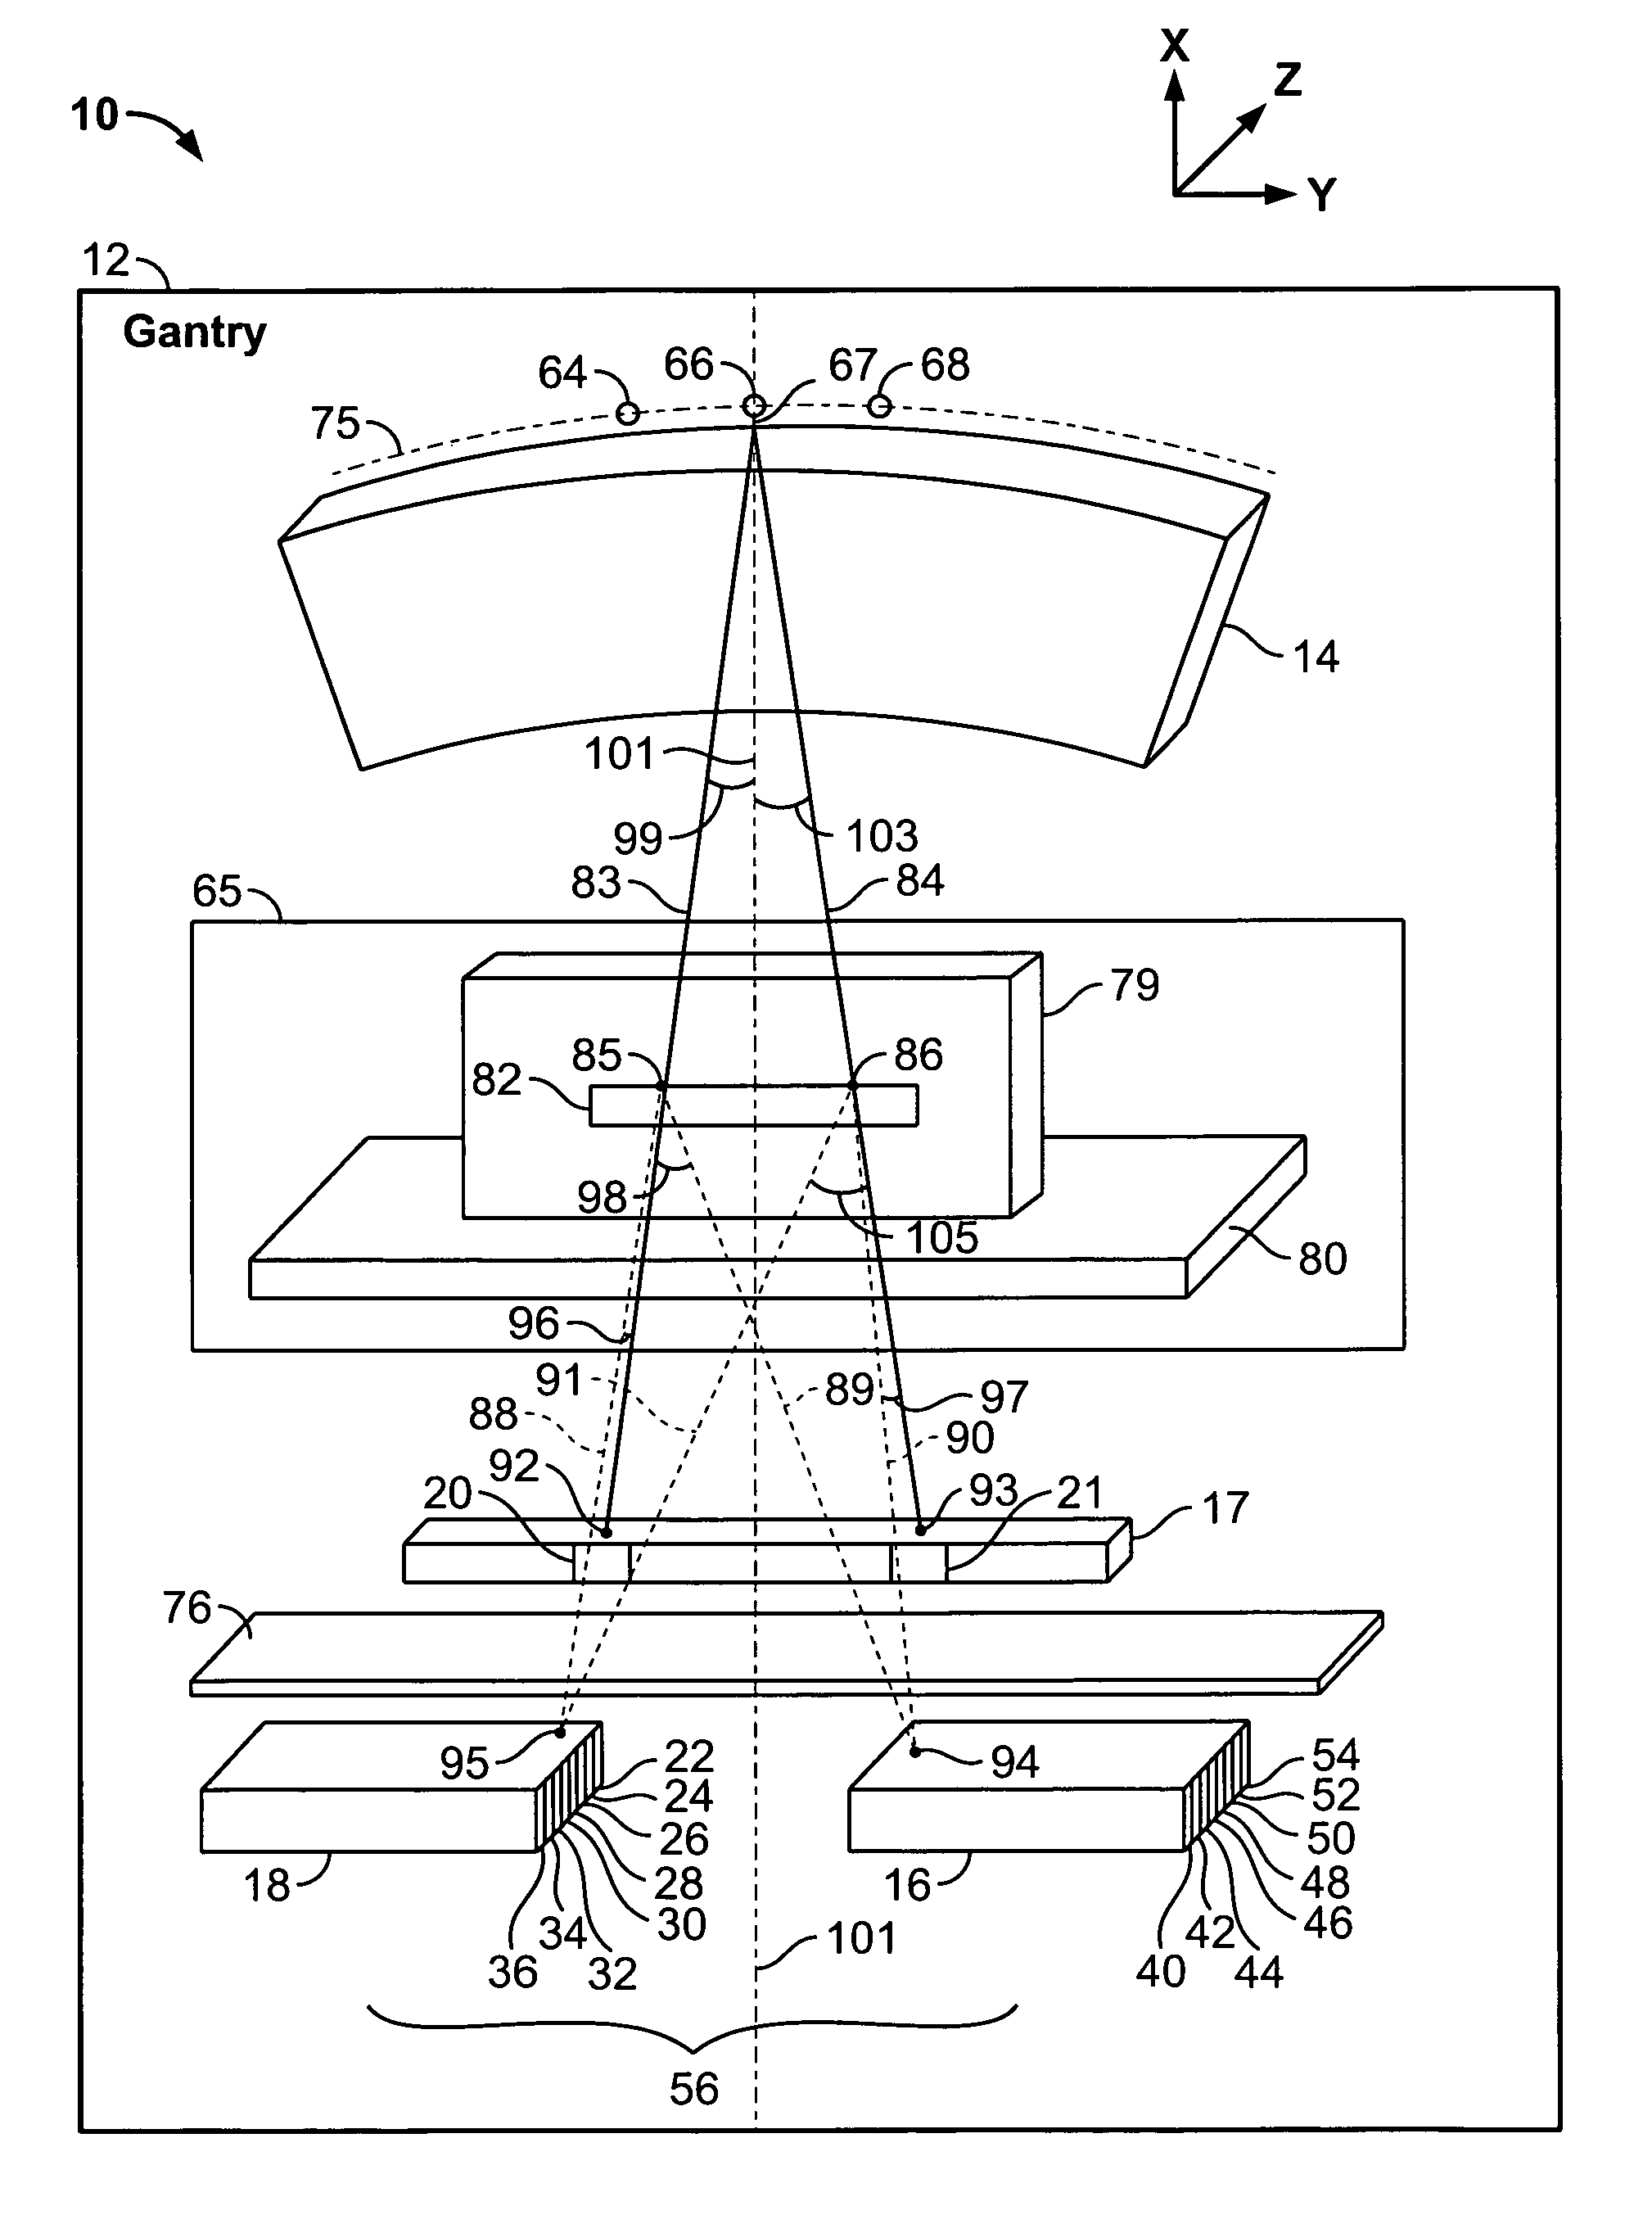 System and methods for characterizing a substance